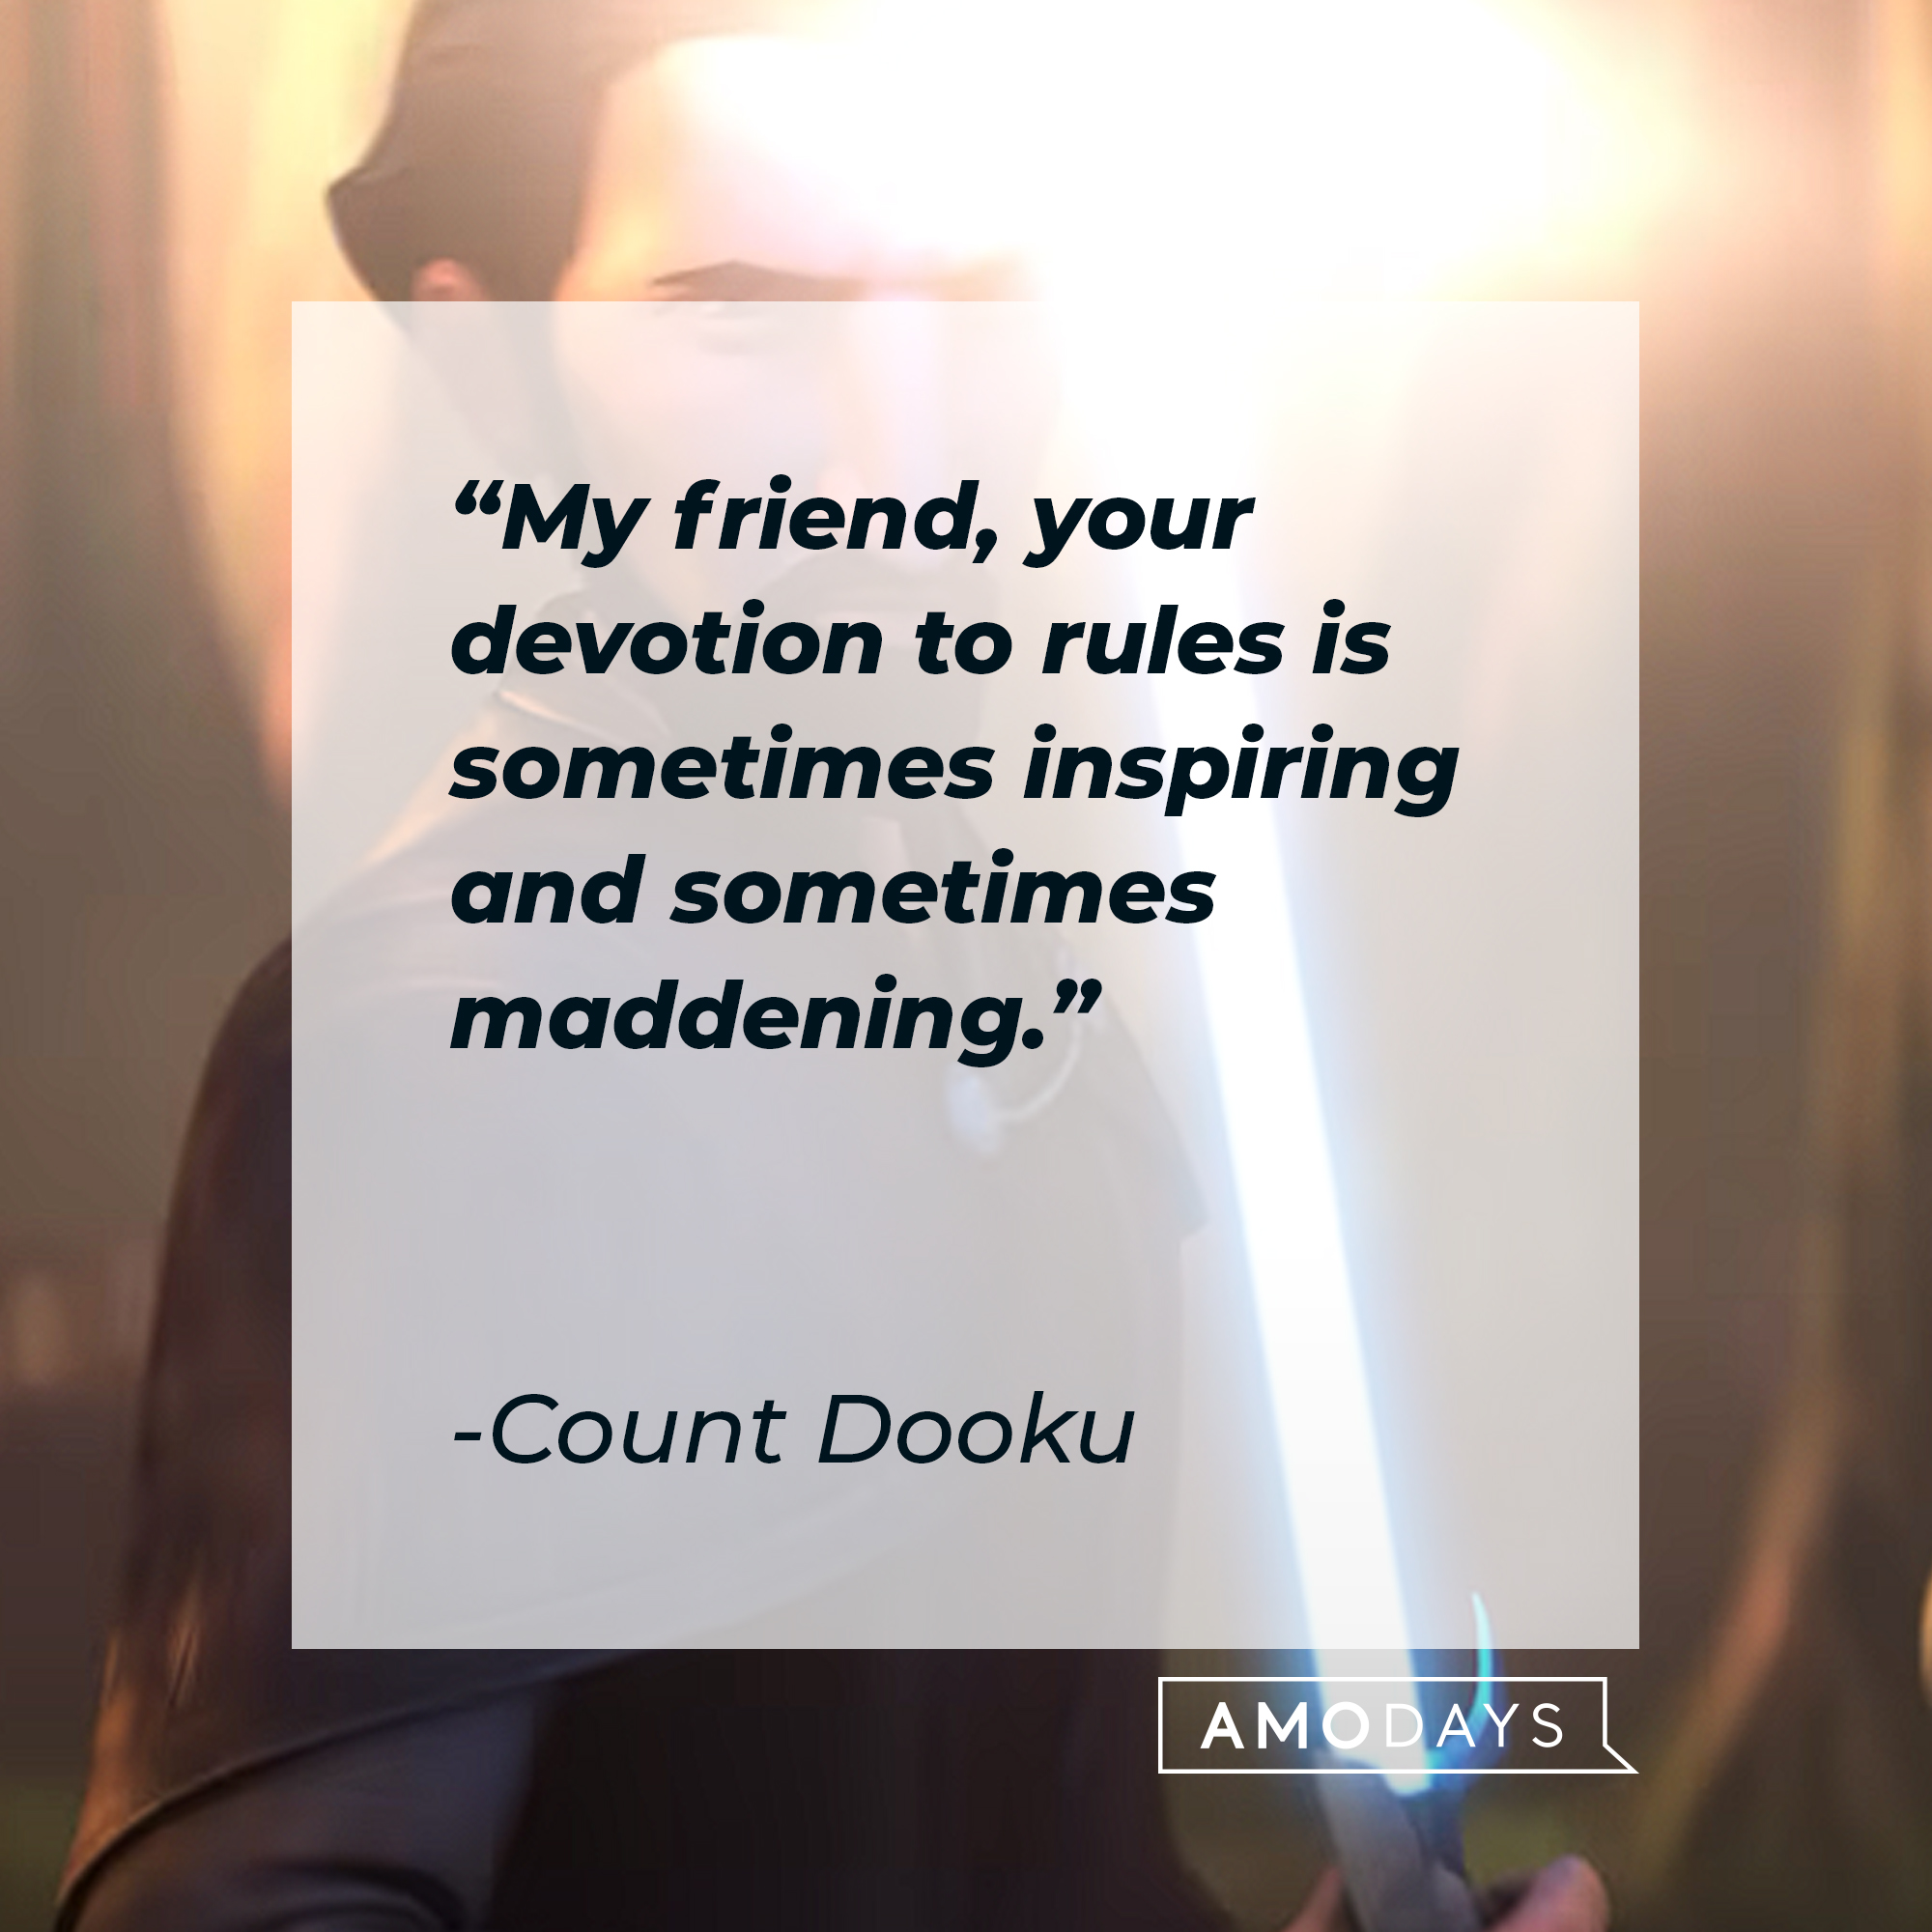 Count Dooku's quote: "My friend, your devotion to rules is sometimes inspiring and sometimes maddening." | Source: youtube.com/StarWars